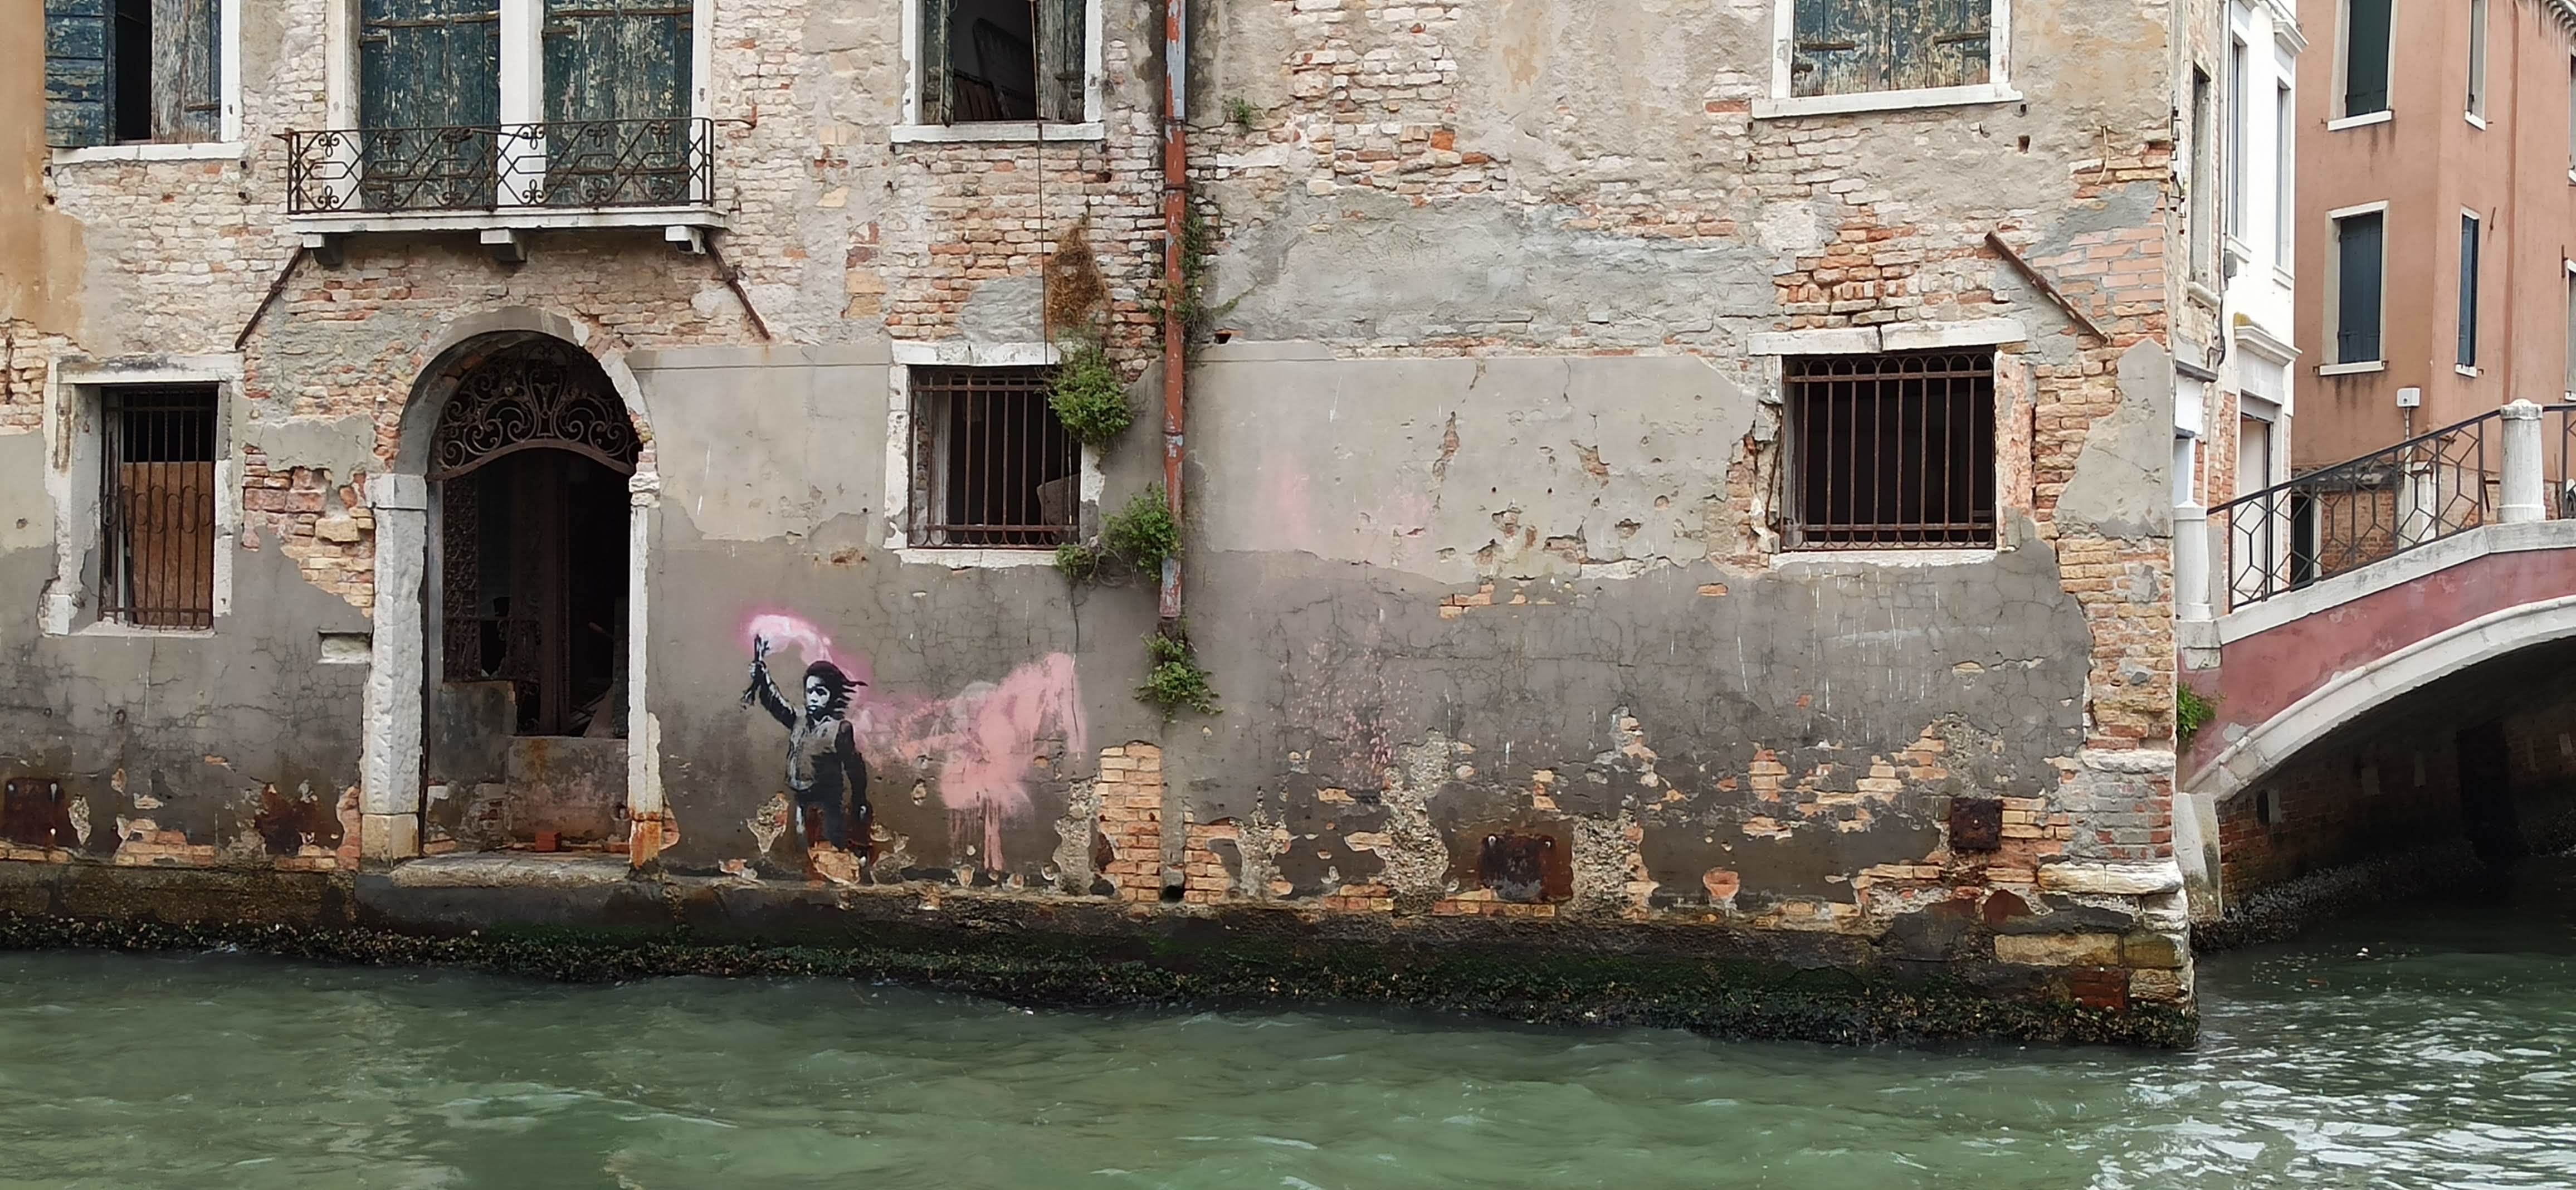 Graffiti 5338 Migrant child by the artist Banksy captured by Rabot in Venezia Italy